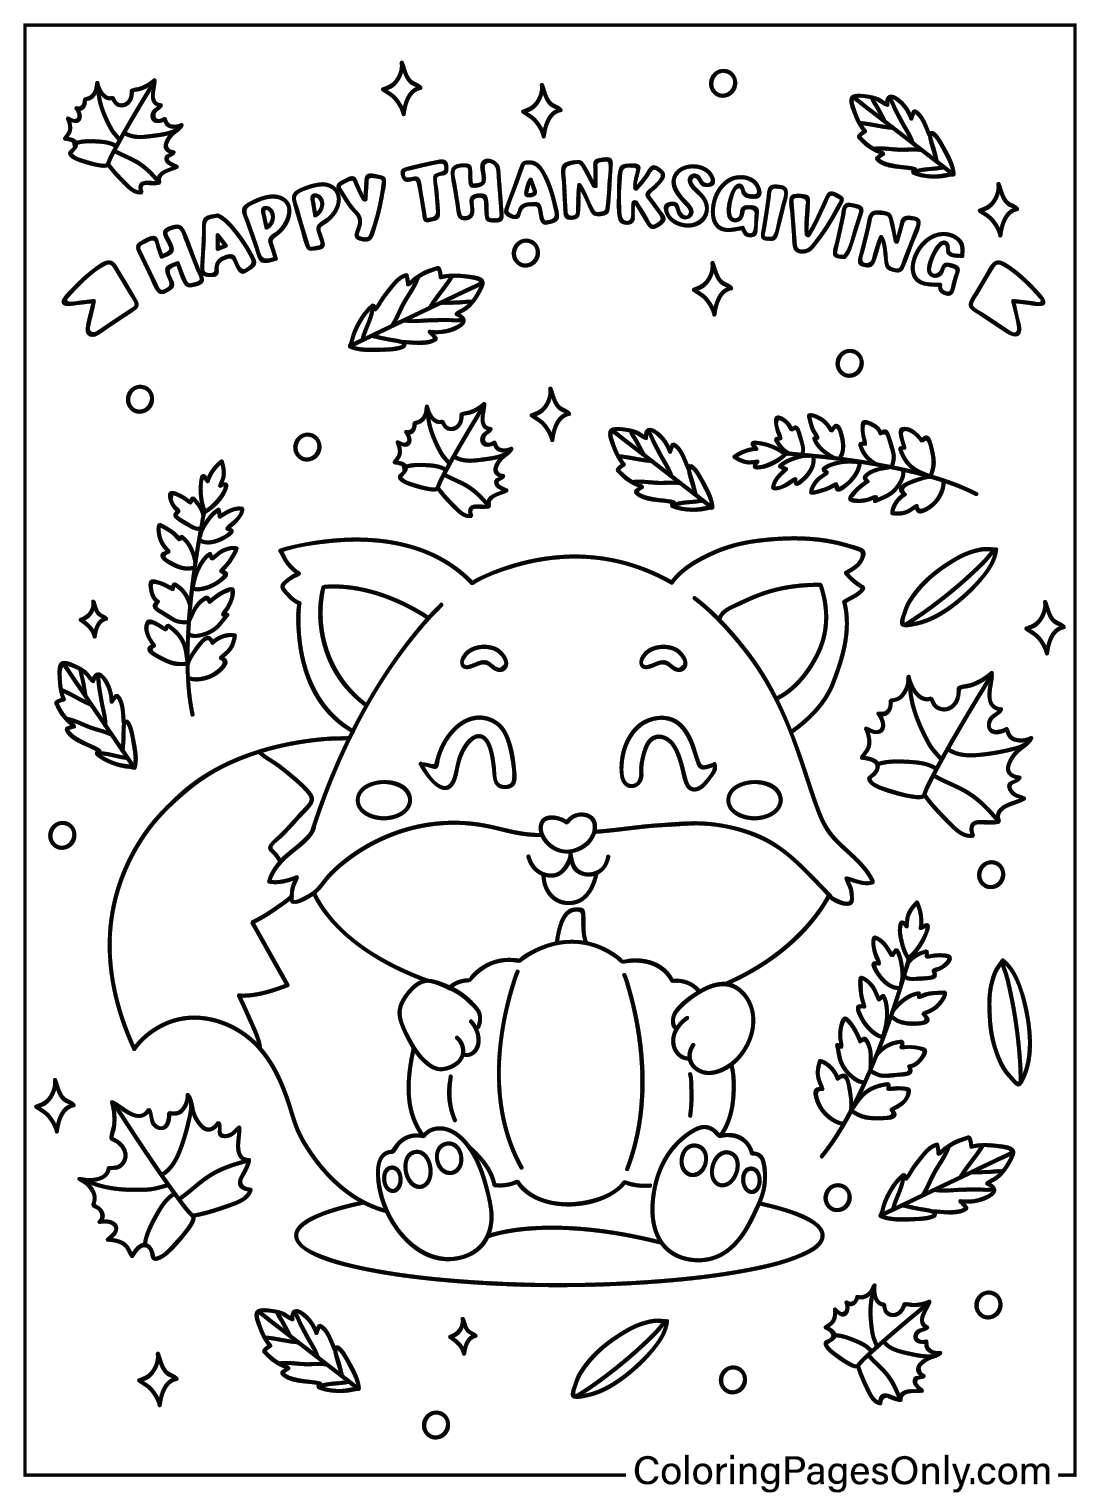 Thanksgiving Cartoon Coloring Page Printable from Thanksgiving Cartoon